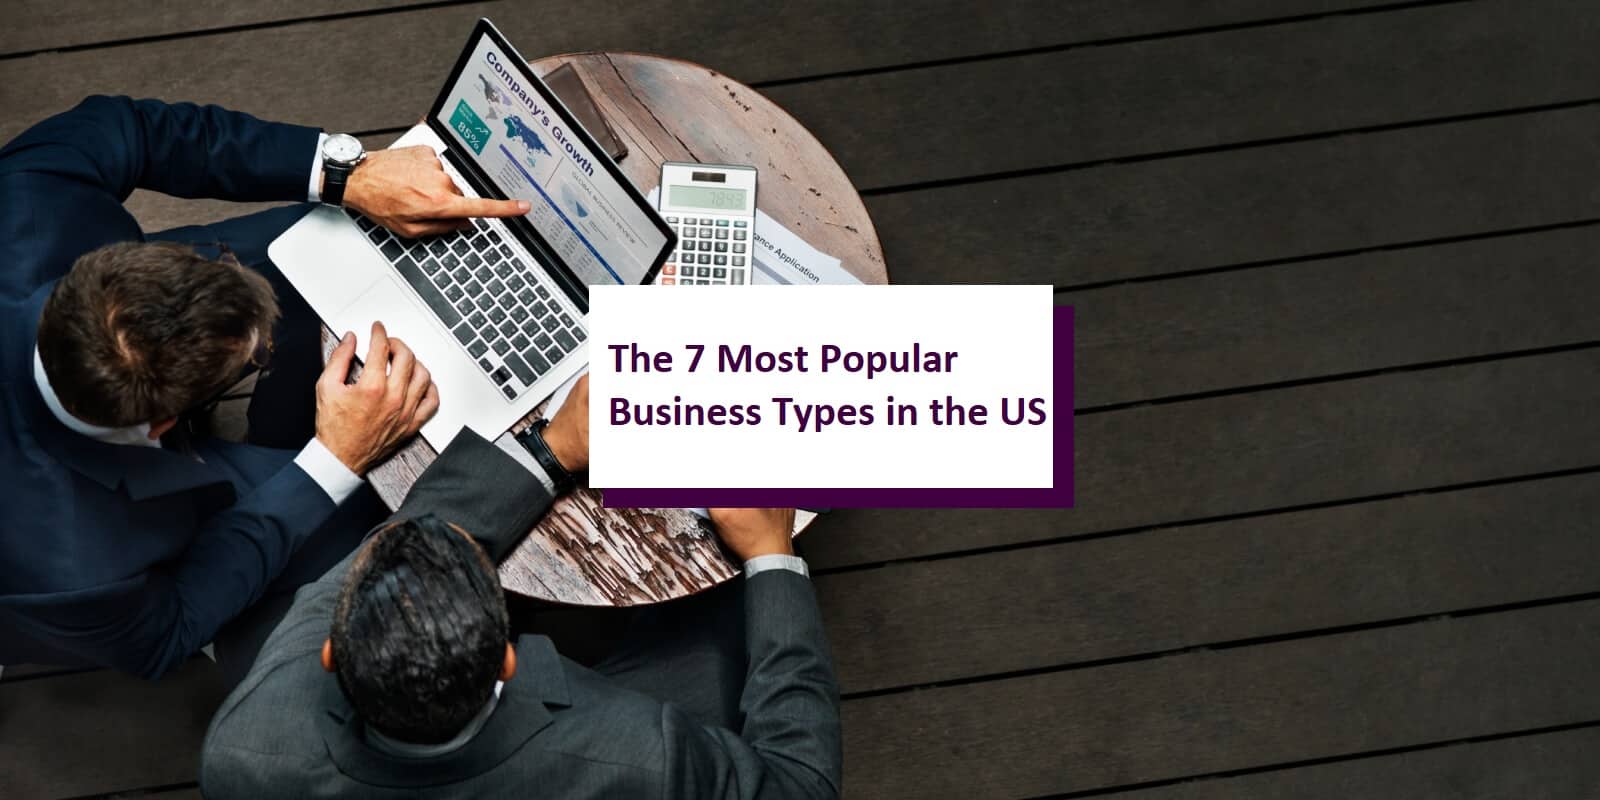 The 7 Most Popular Business Types in the US